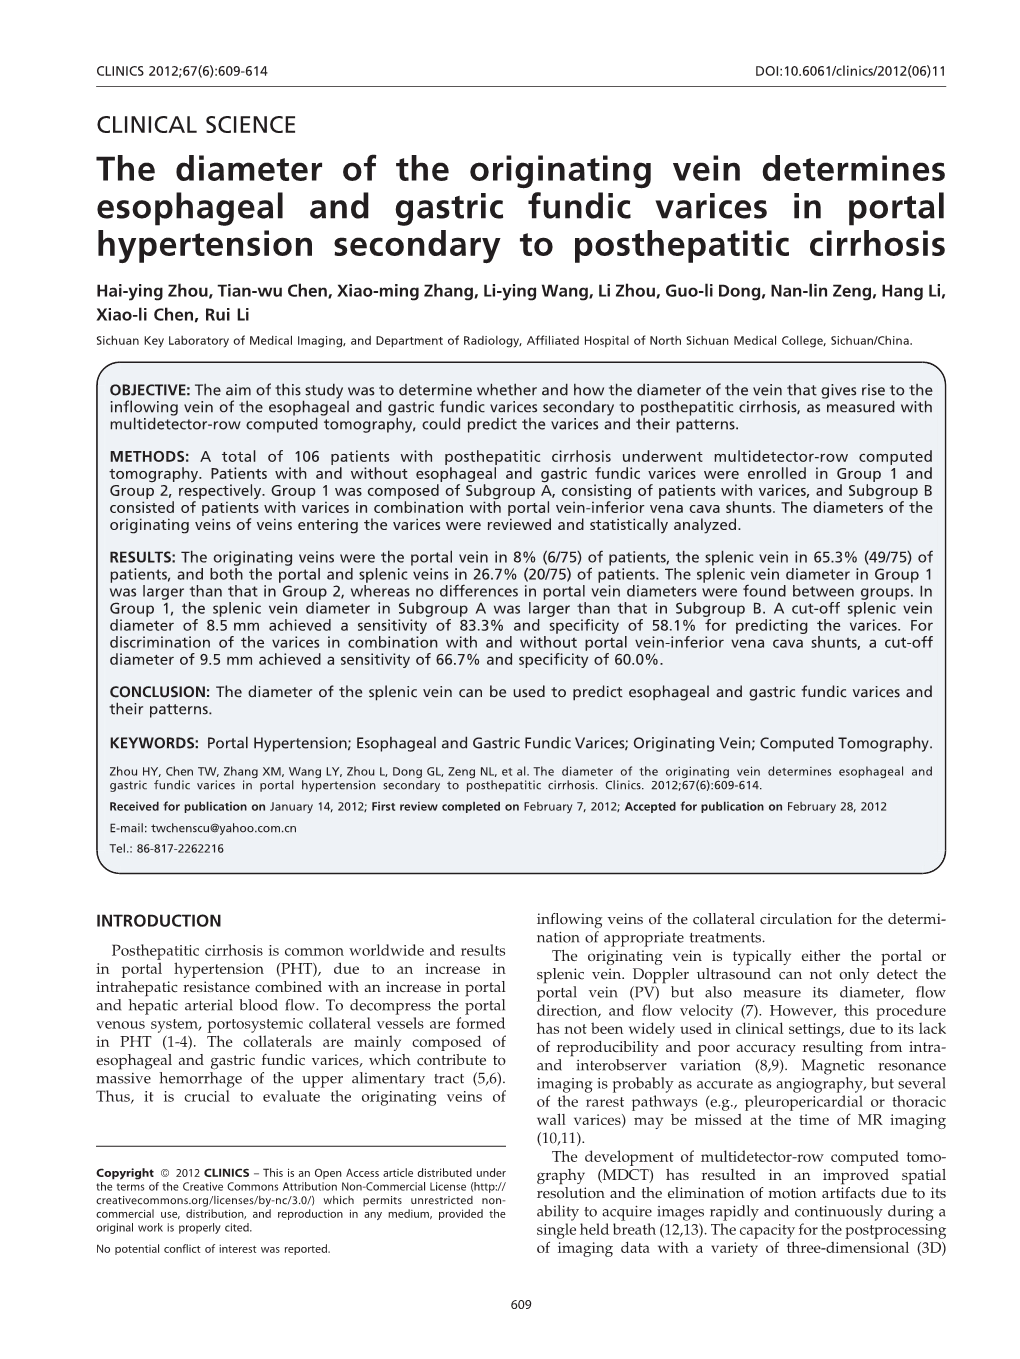 The Diameter of the Originating Vein Determines Esophageal and Gastric Fundic Varices in Portal Hypertension Secondary to Posthepatitic Cirrhosis